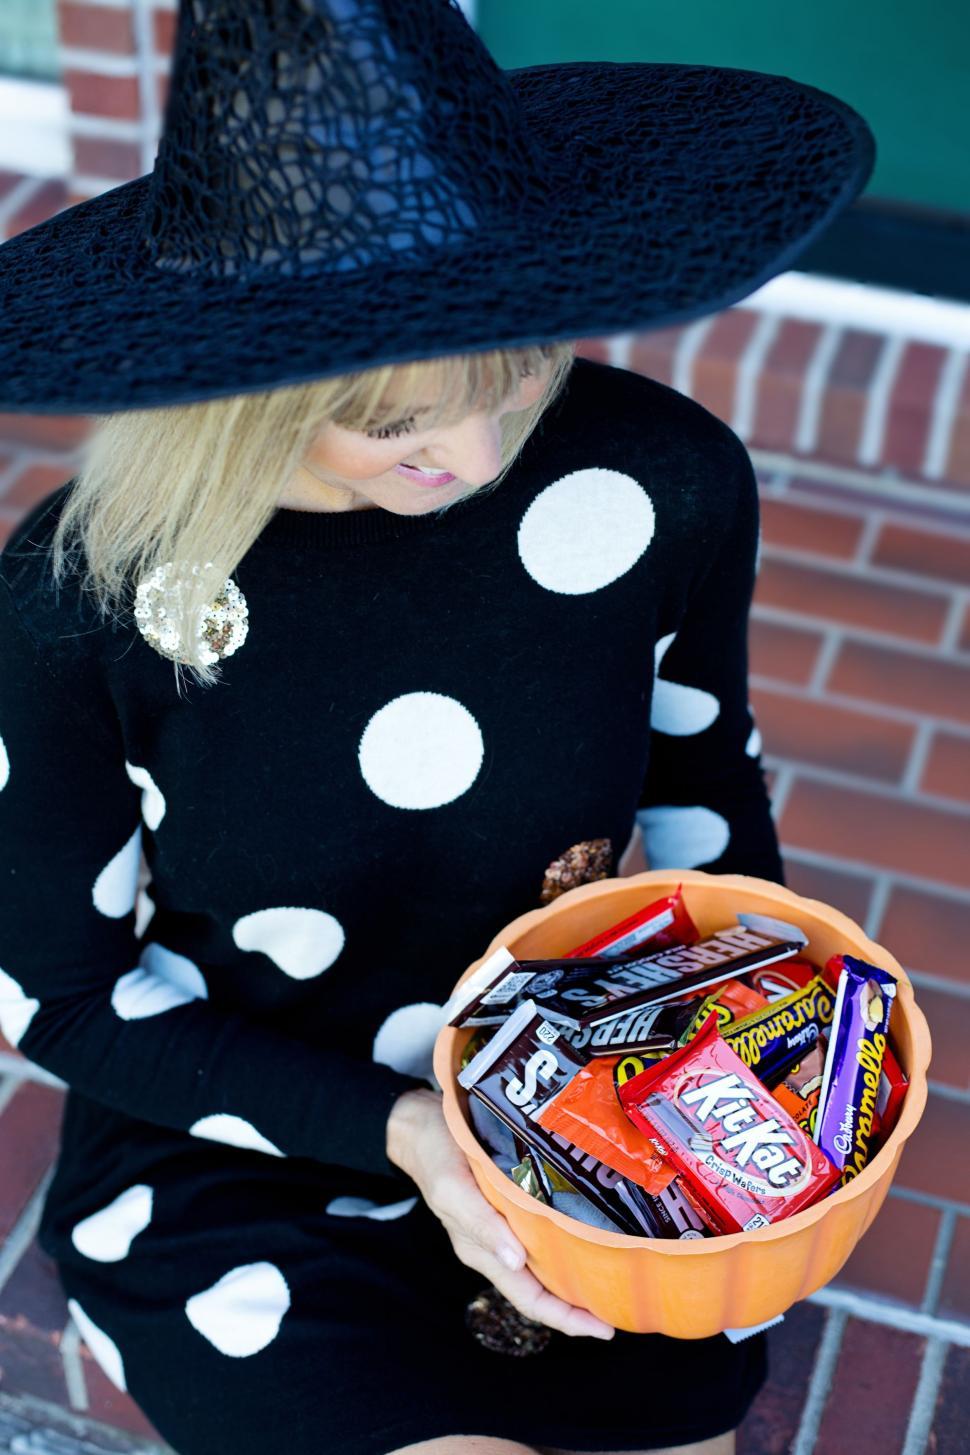 Free Image of Woman With Chocolates - trick-or-treat 